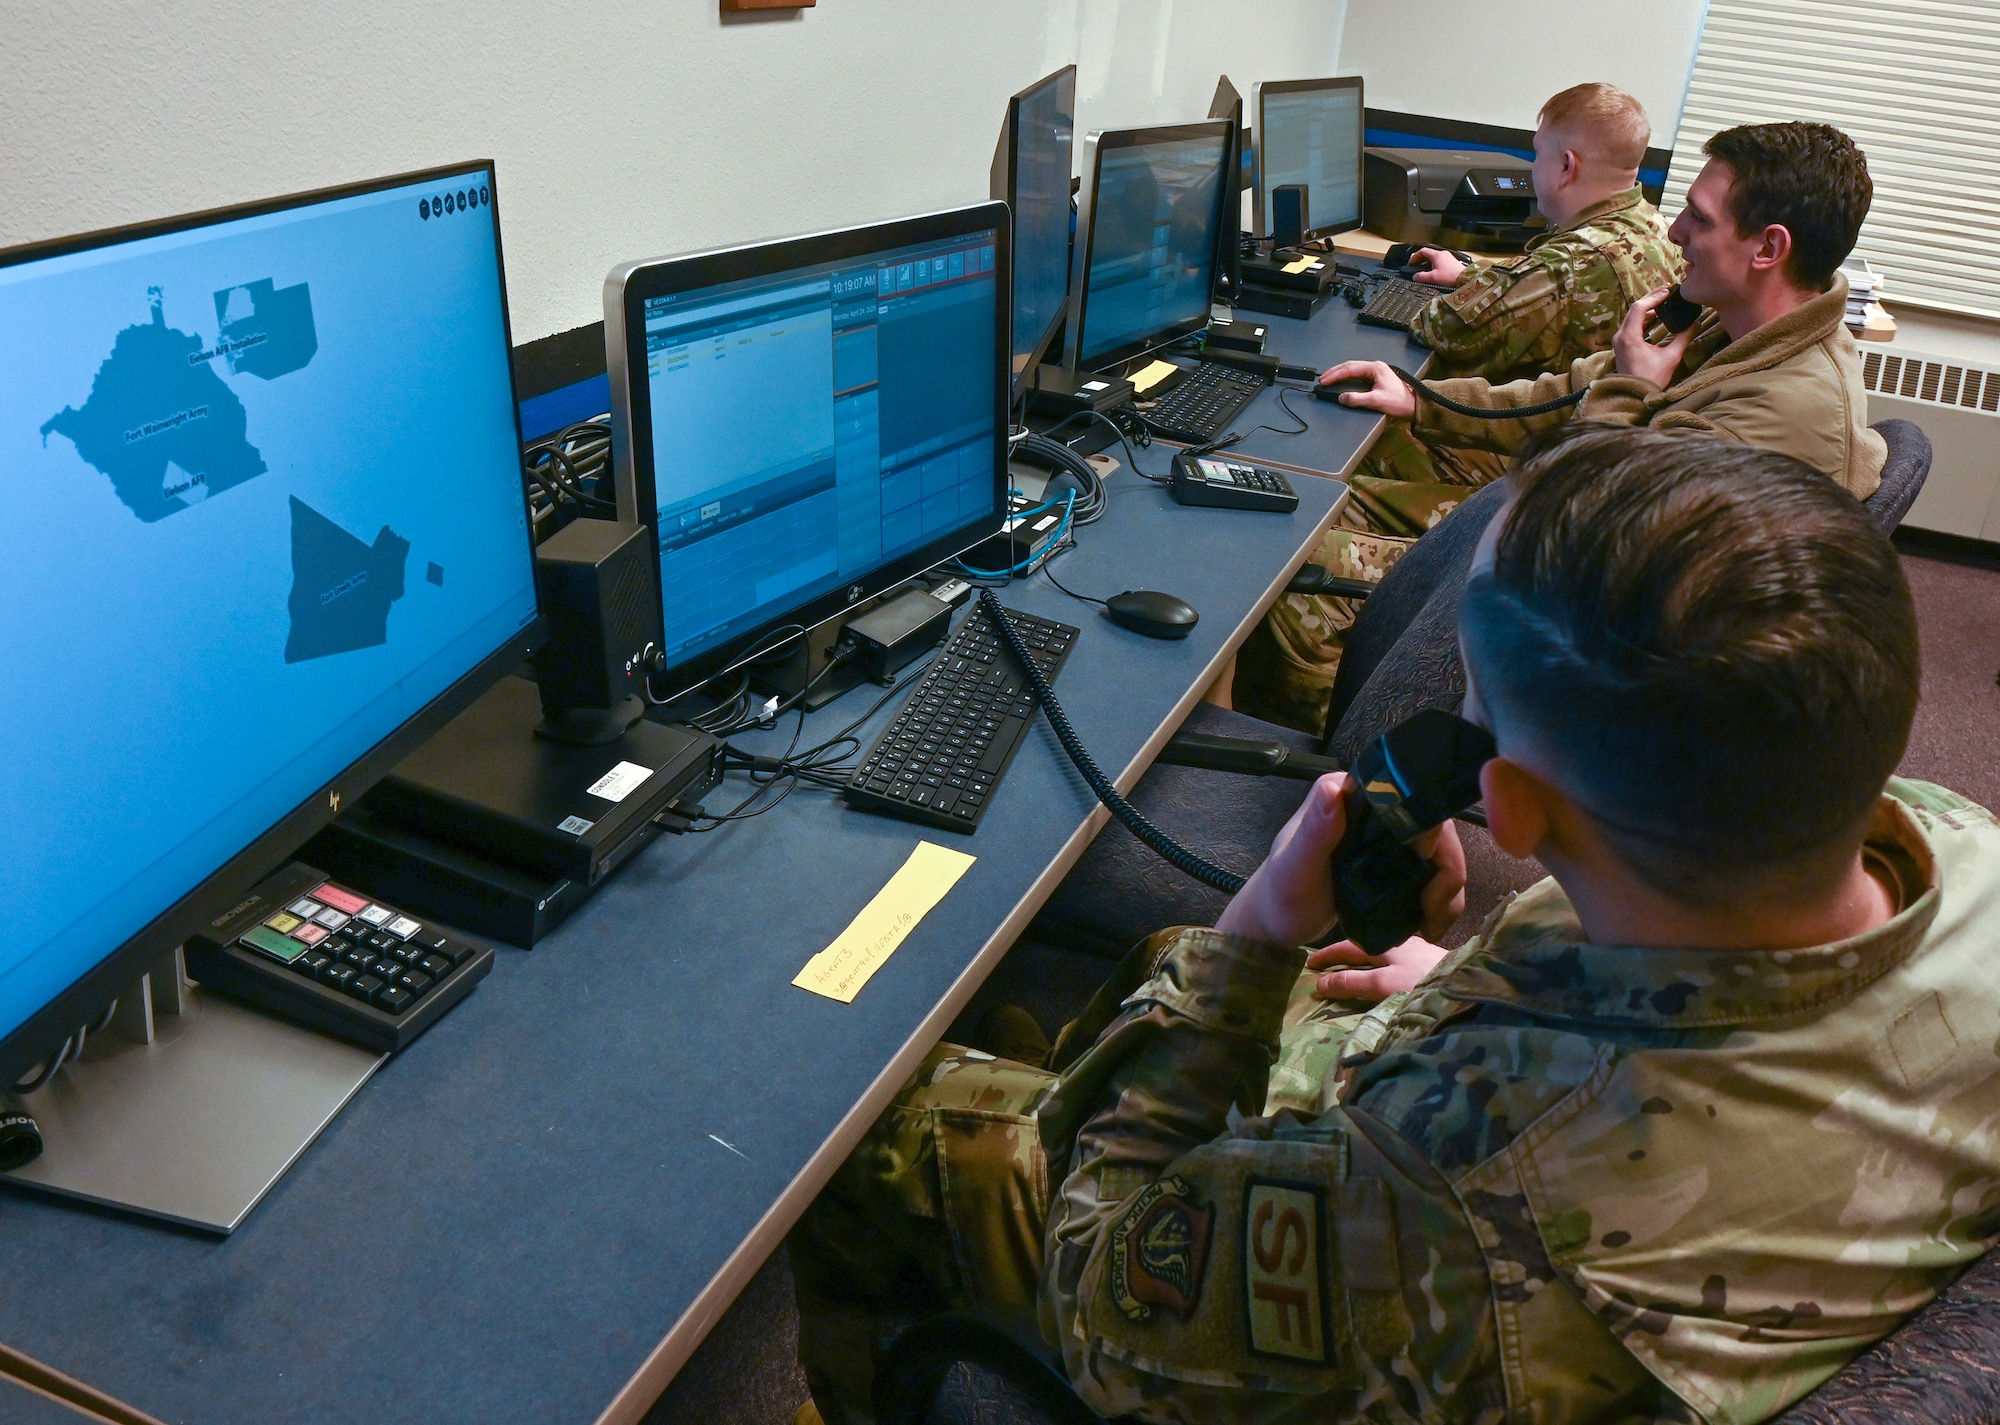 U.S. Air Force Airmen from the 354th Civil Engineering Squadron receive training on the updated 911 system April 27, 2023 at Eielson Air Force Base. Eielson Air Force Base recently changed to the Vesta E-911 system that provides a more streamlined and updated system for emergency dispatchers. (U.S. Air Force photo by Staff Sgt. Danielle Sukhlall)